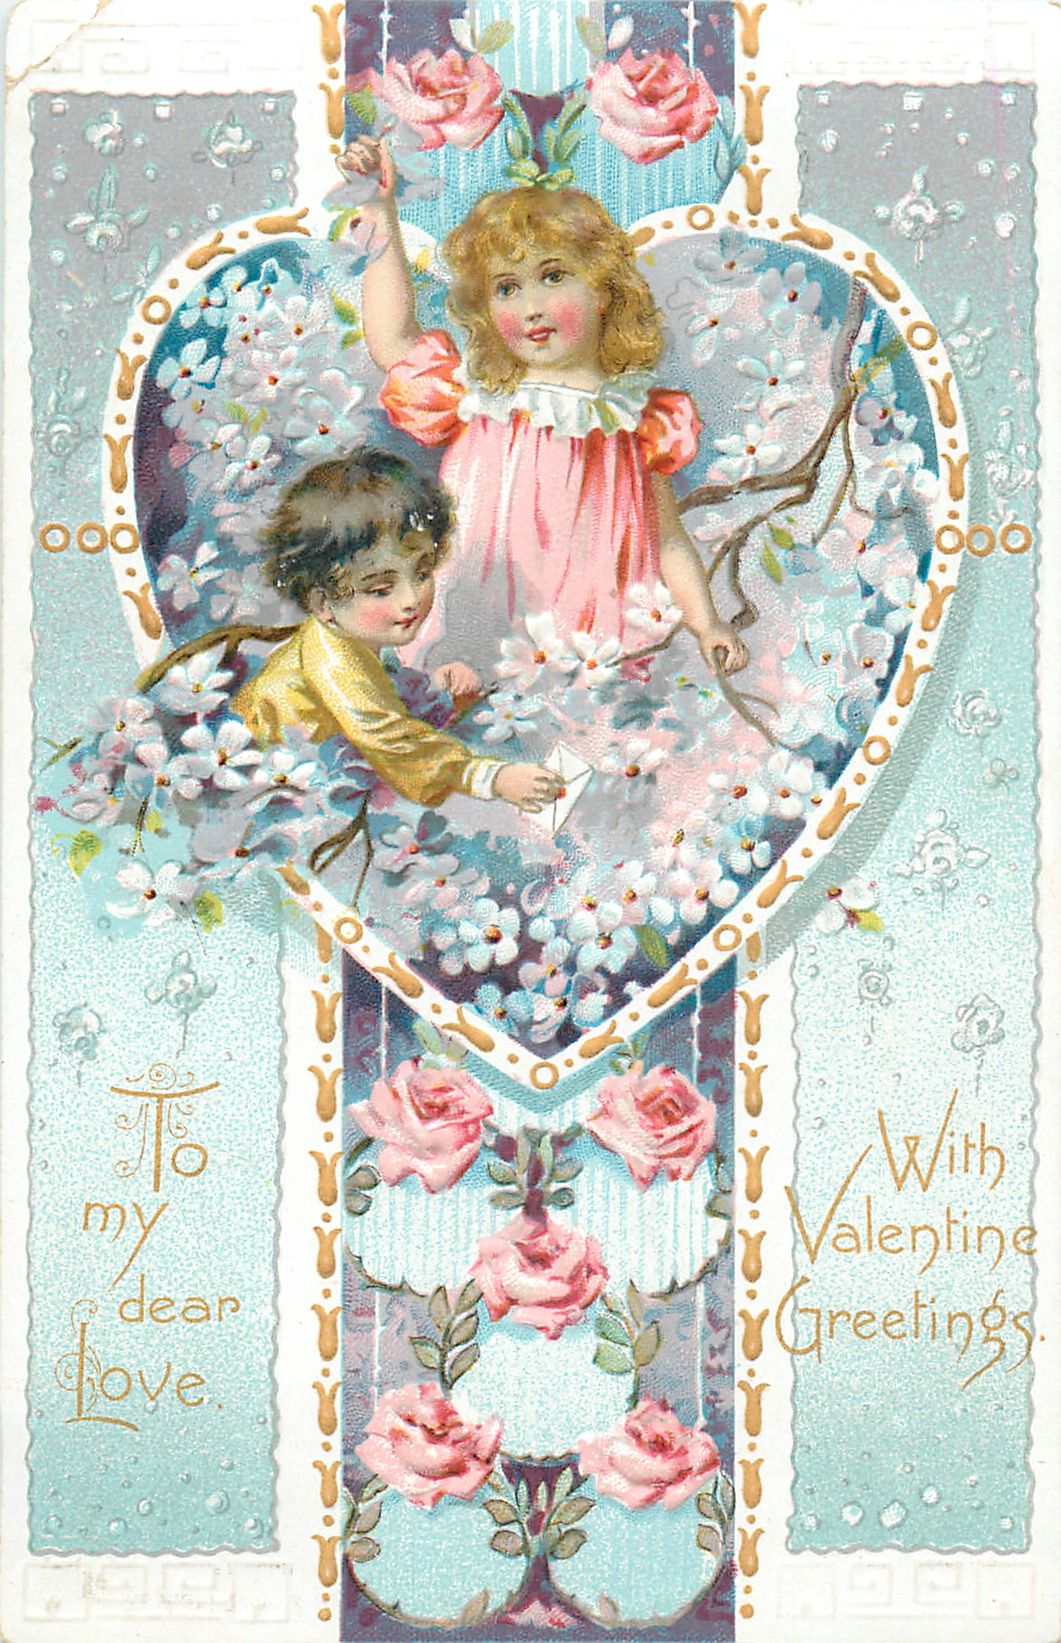 Full Sized Image To My Dear Love With Valentine Greetings Tuckdb